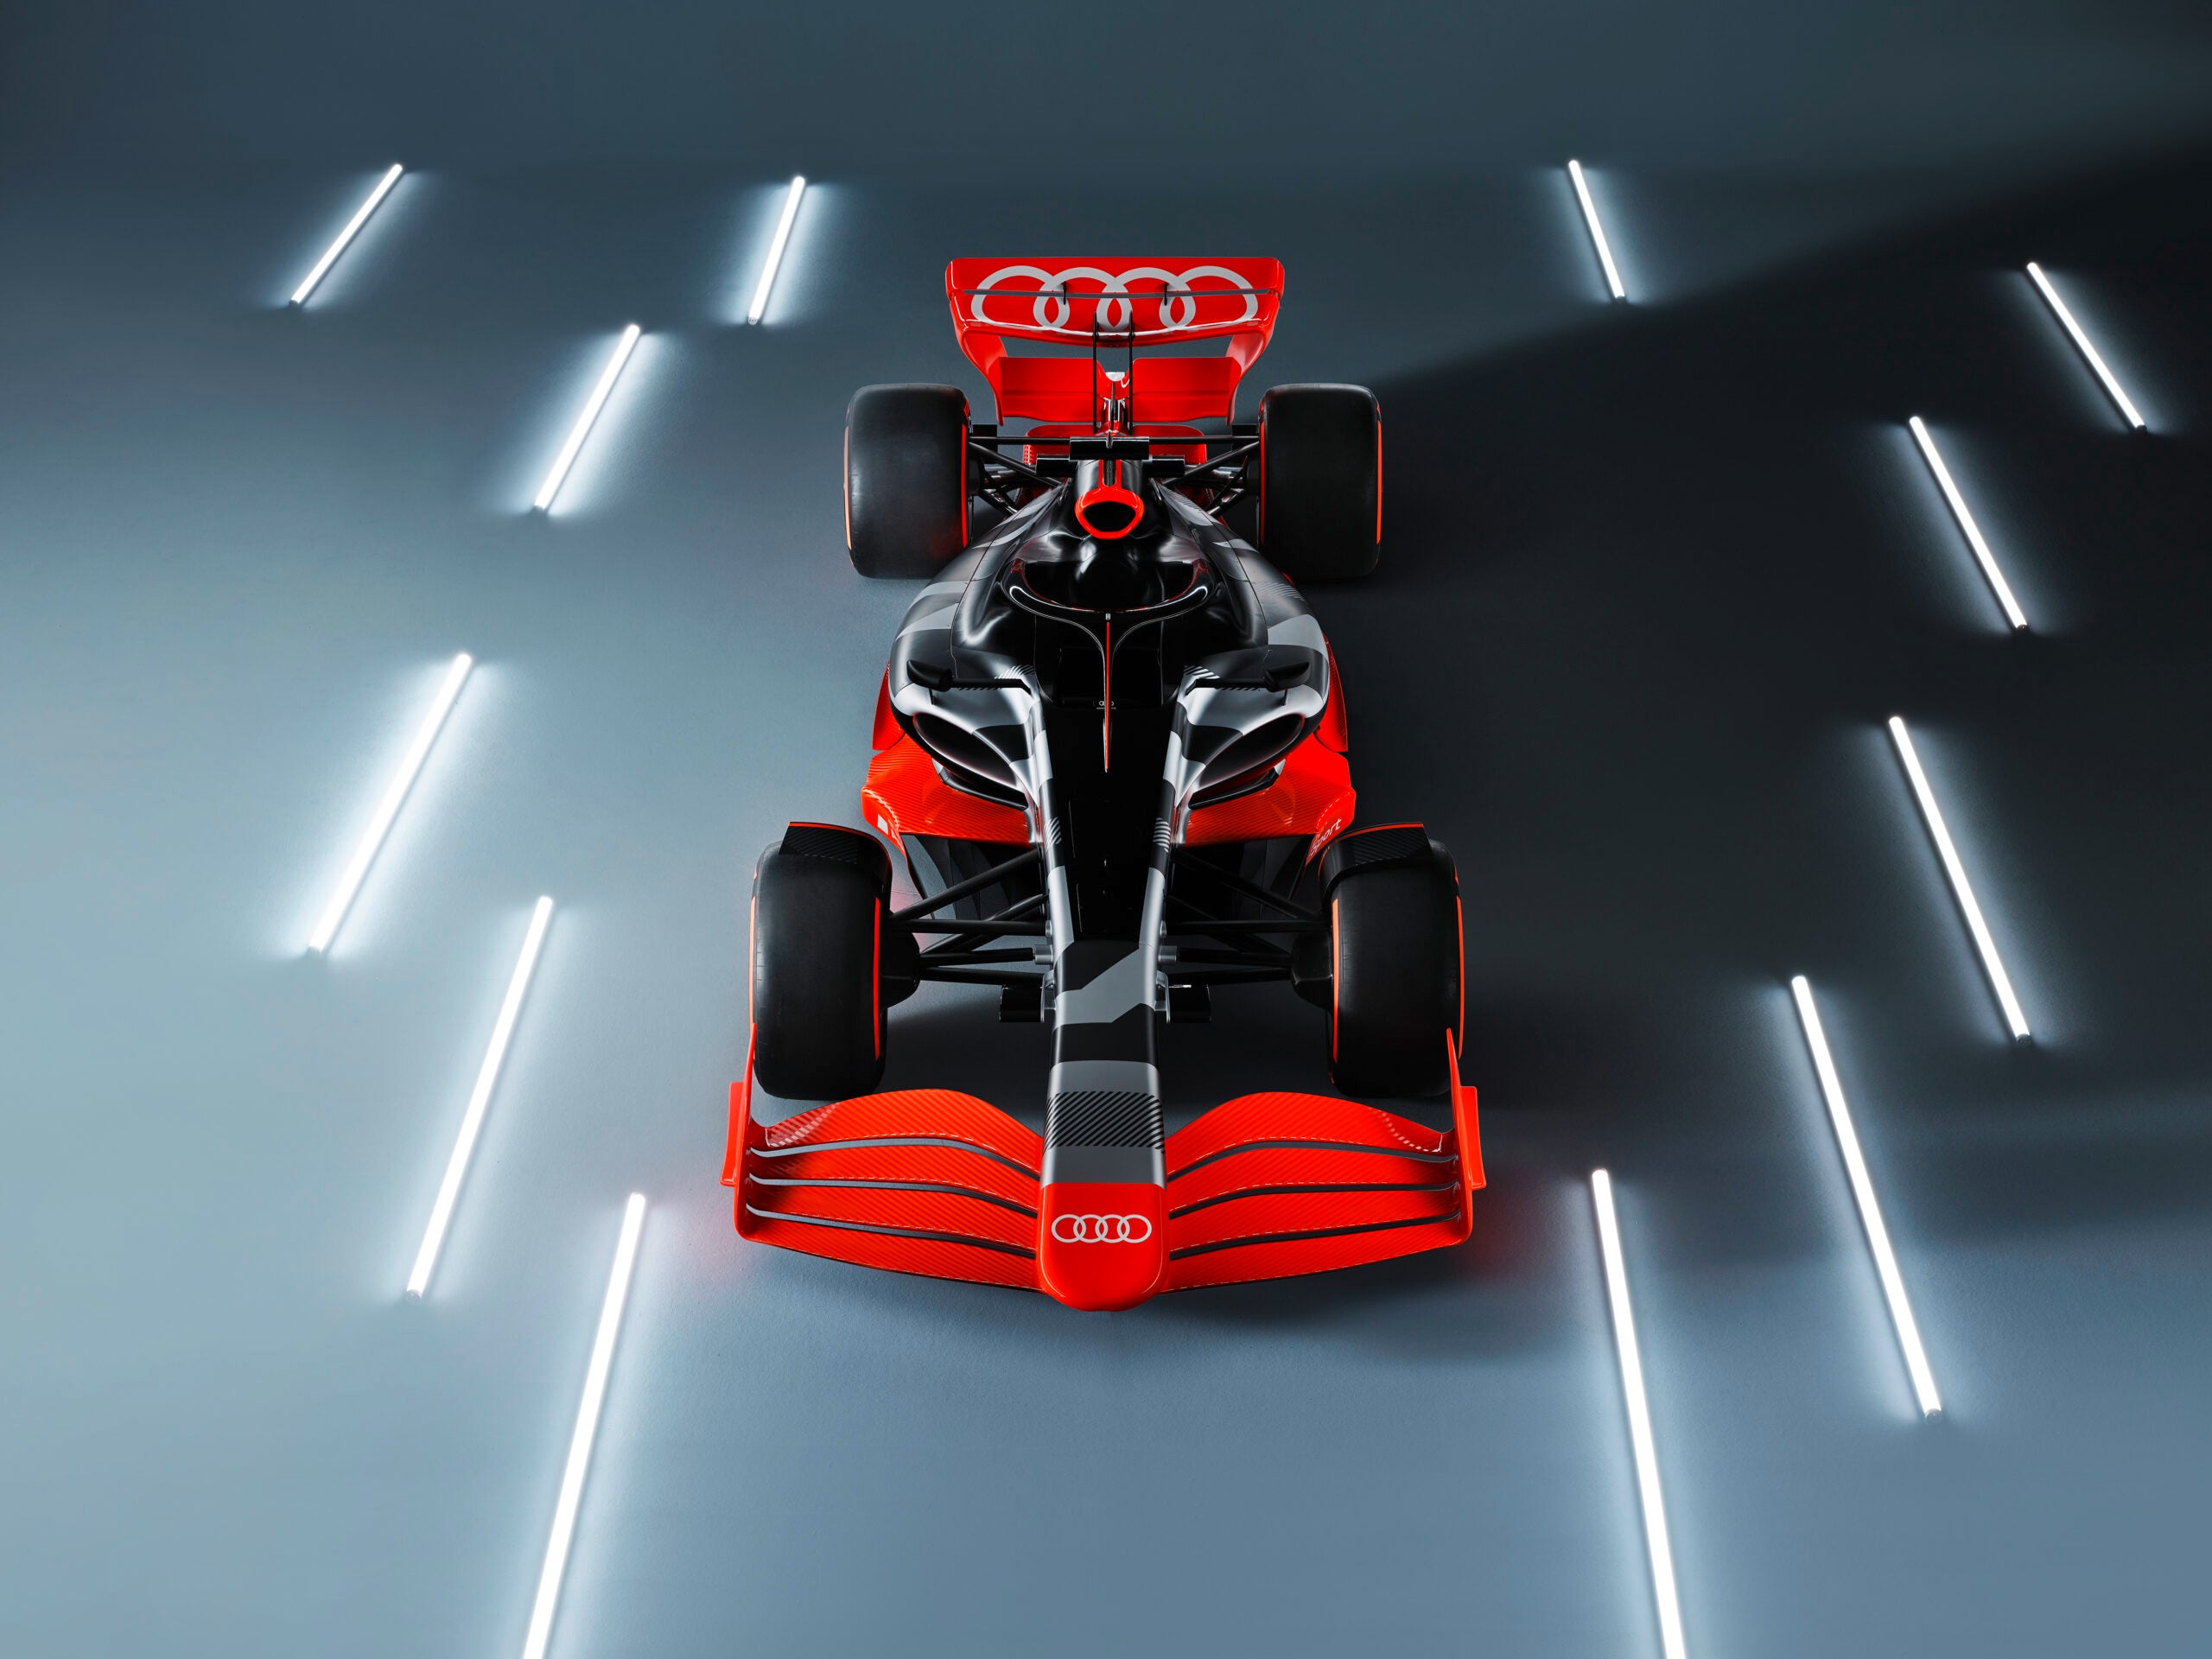 Audi Partners With Sauber To Race in Formula 1 Starting in 2026